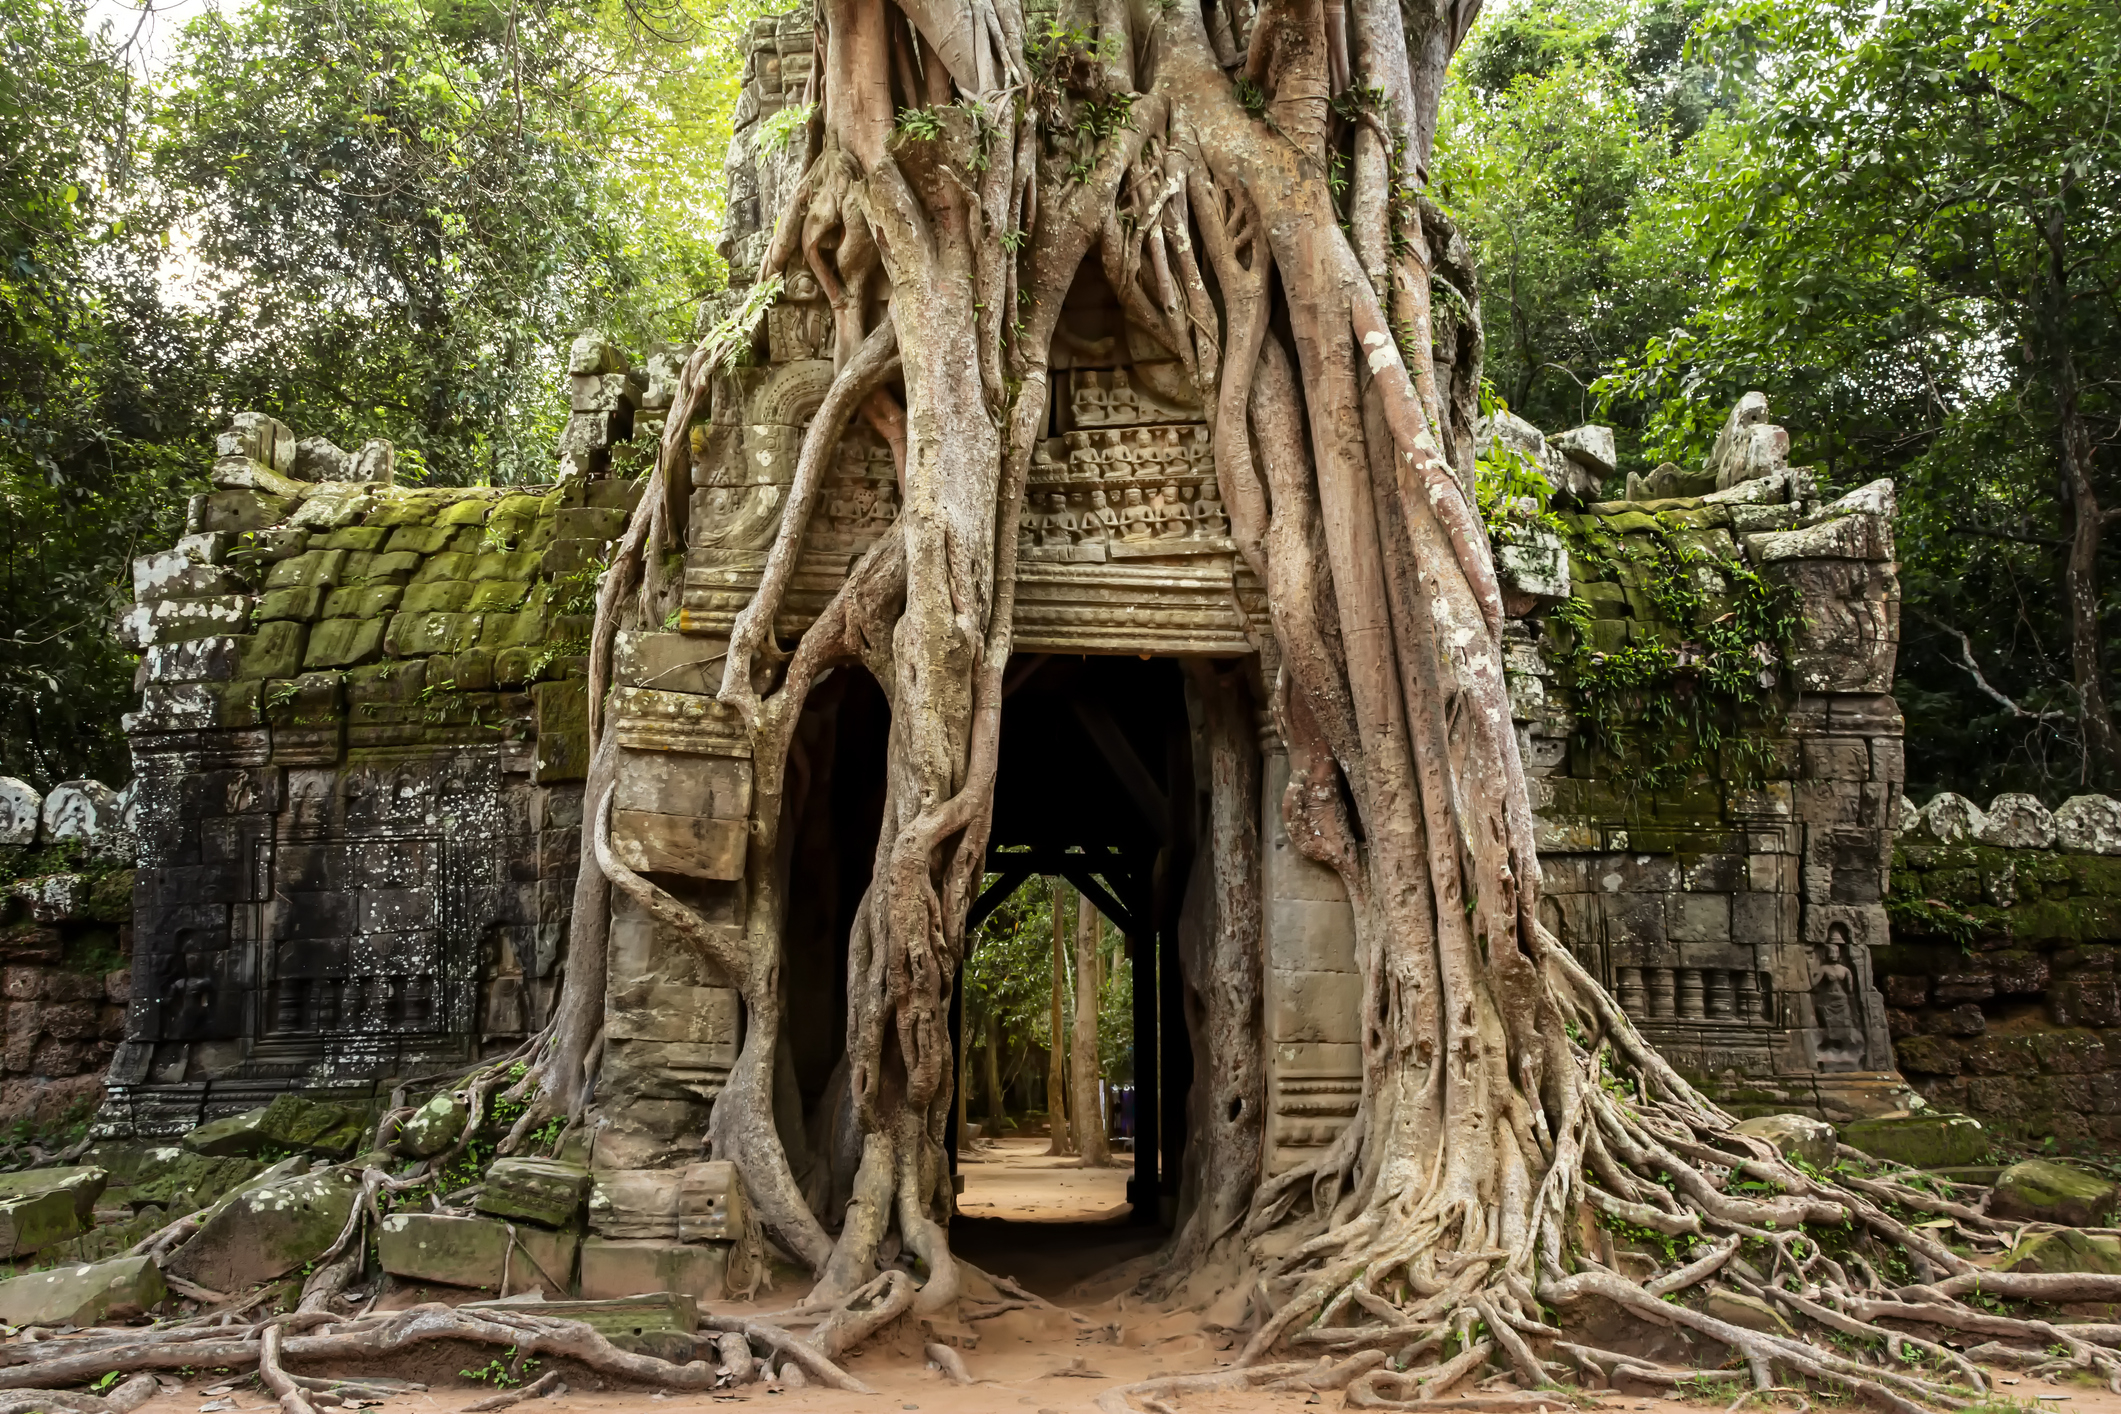 Ancient stone temple in Cambodia&#x27;s Angkor Wat with large tree roots growing over and through the structure, surrounded by dense forest